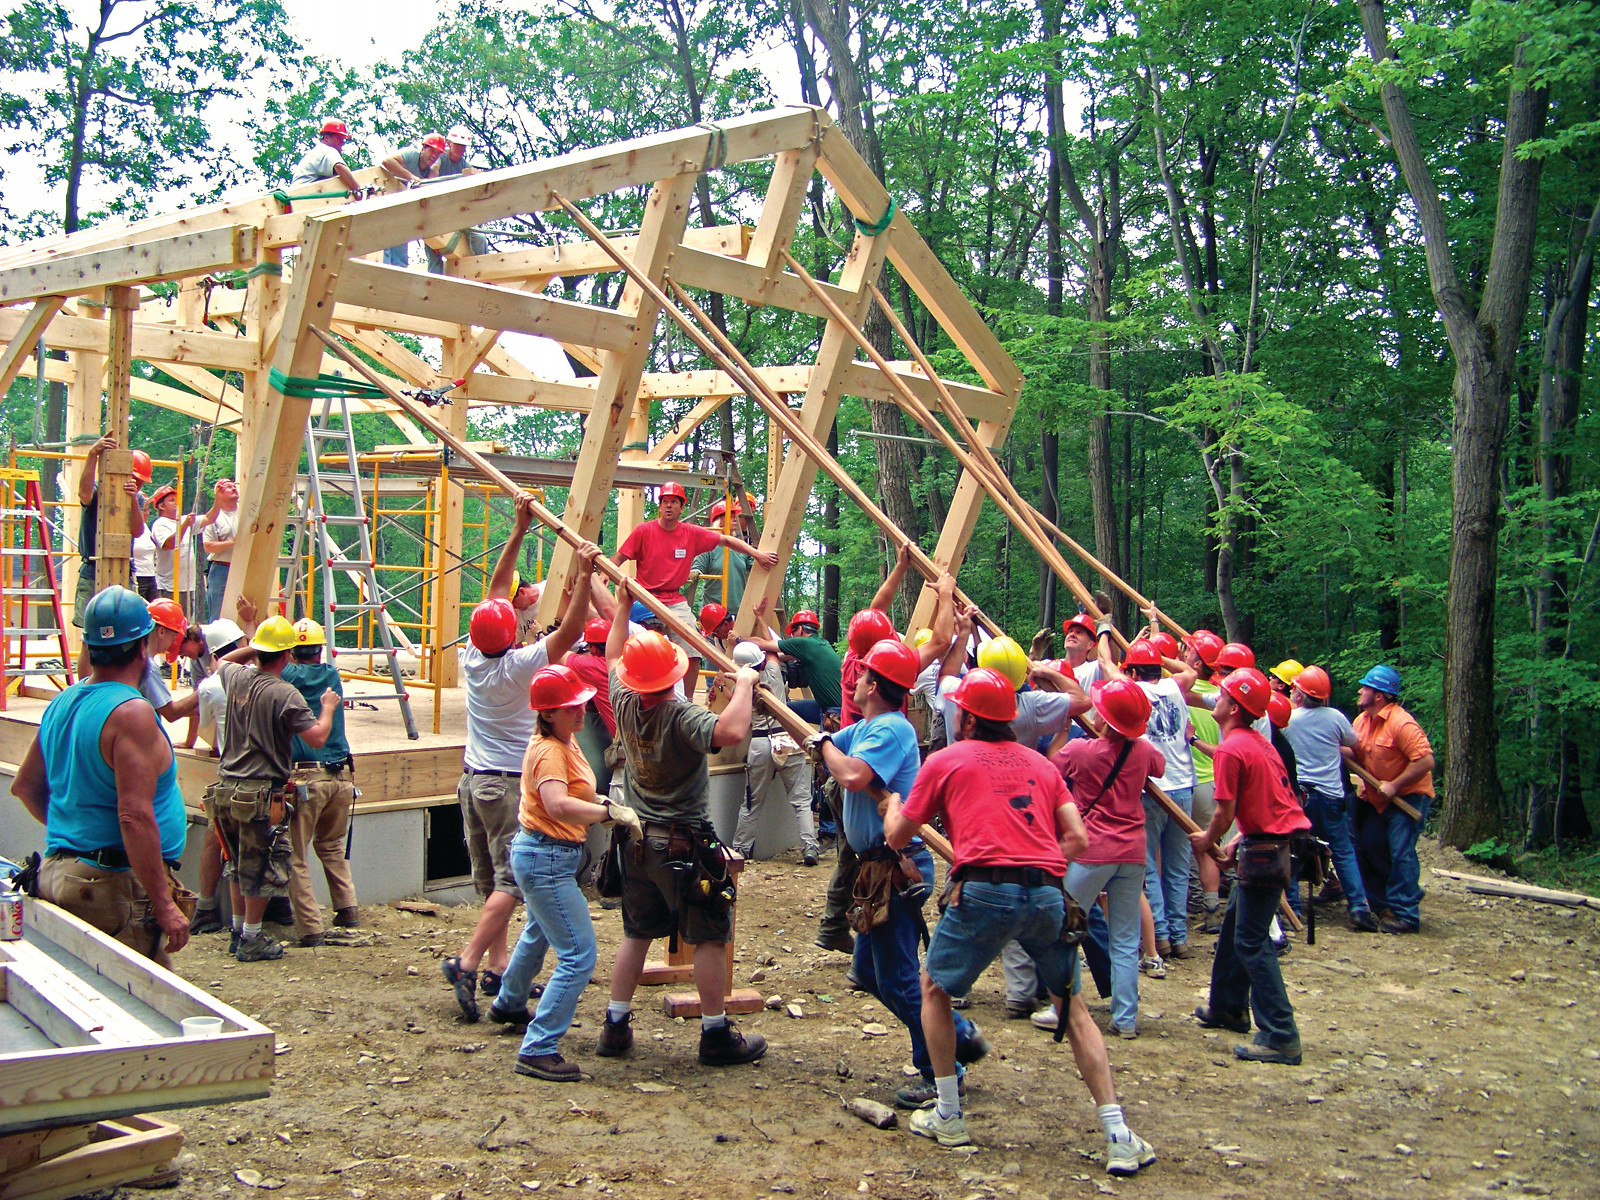 Timber frame raisings are special, celebrating both craft and shelter. Join New Energy Works to hand-raise the frame in the Granary District Aug 15th.